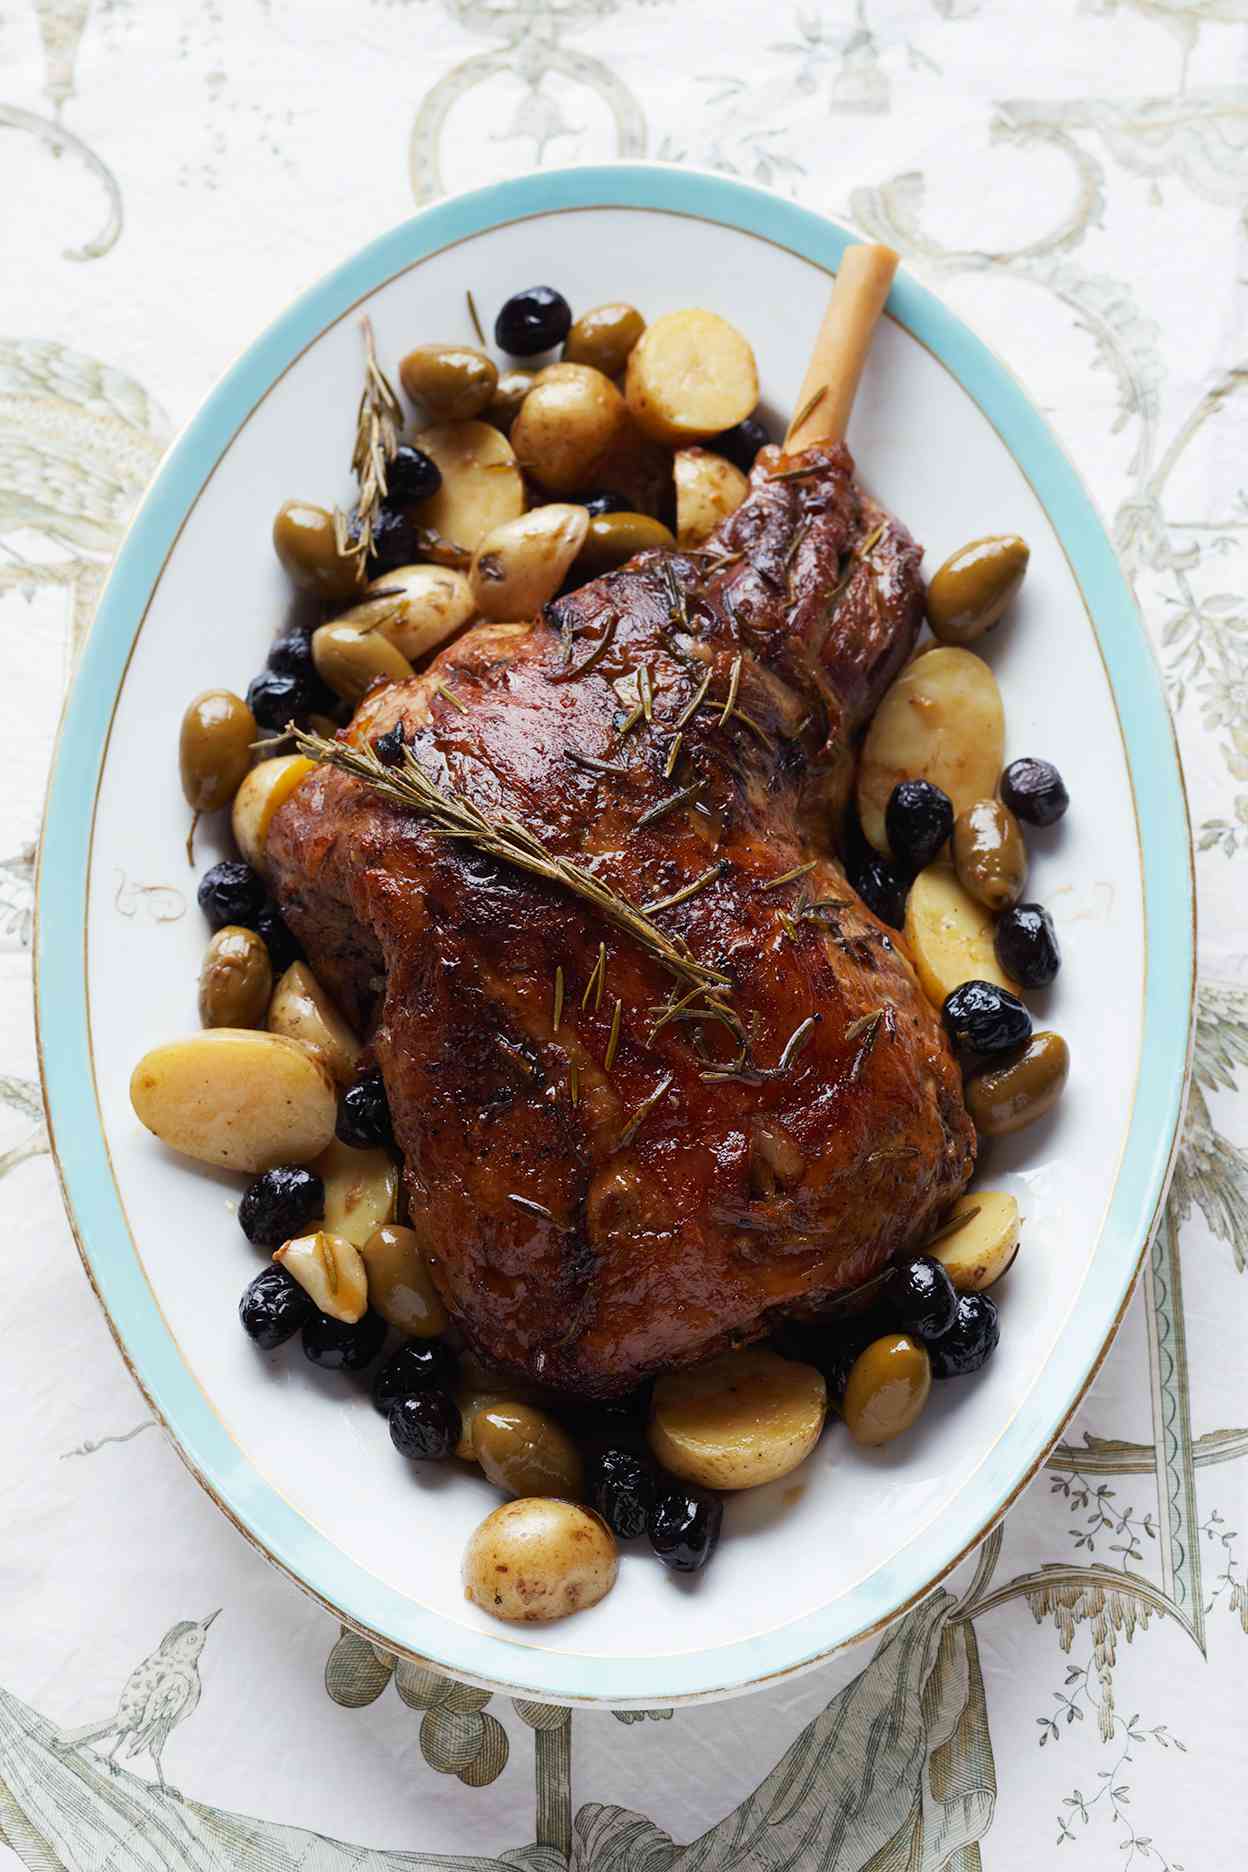 Braised Leg of Lamb with Potatoes and Olives